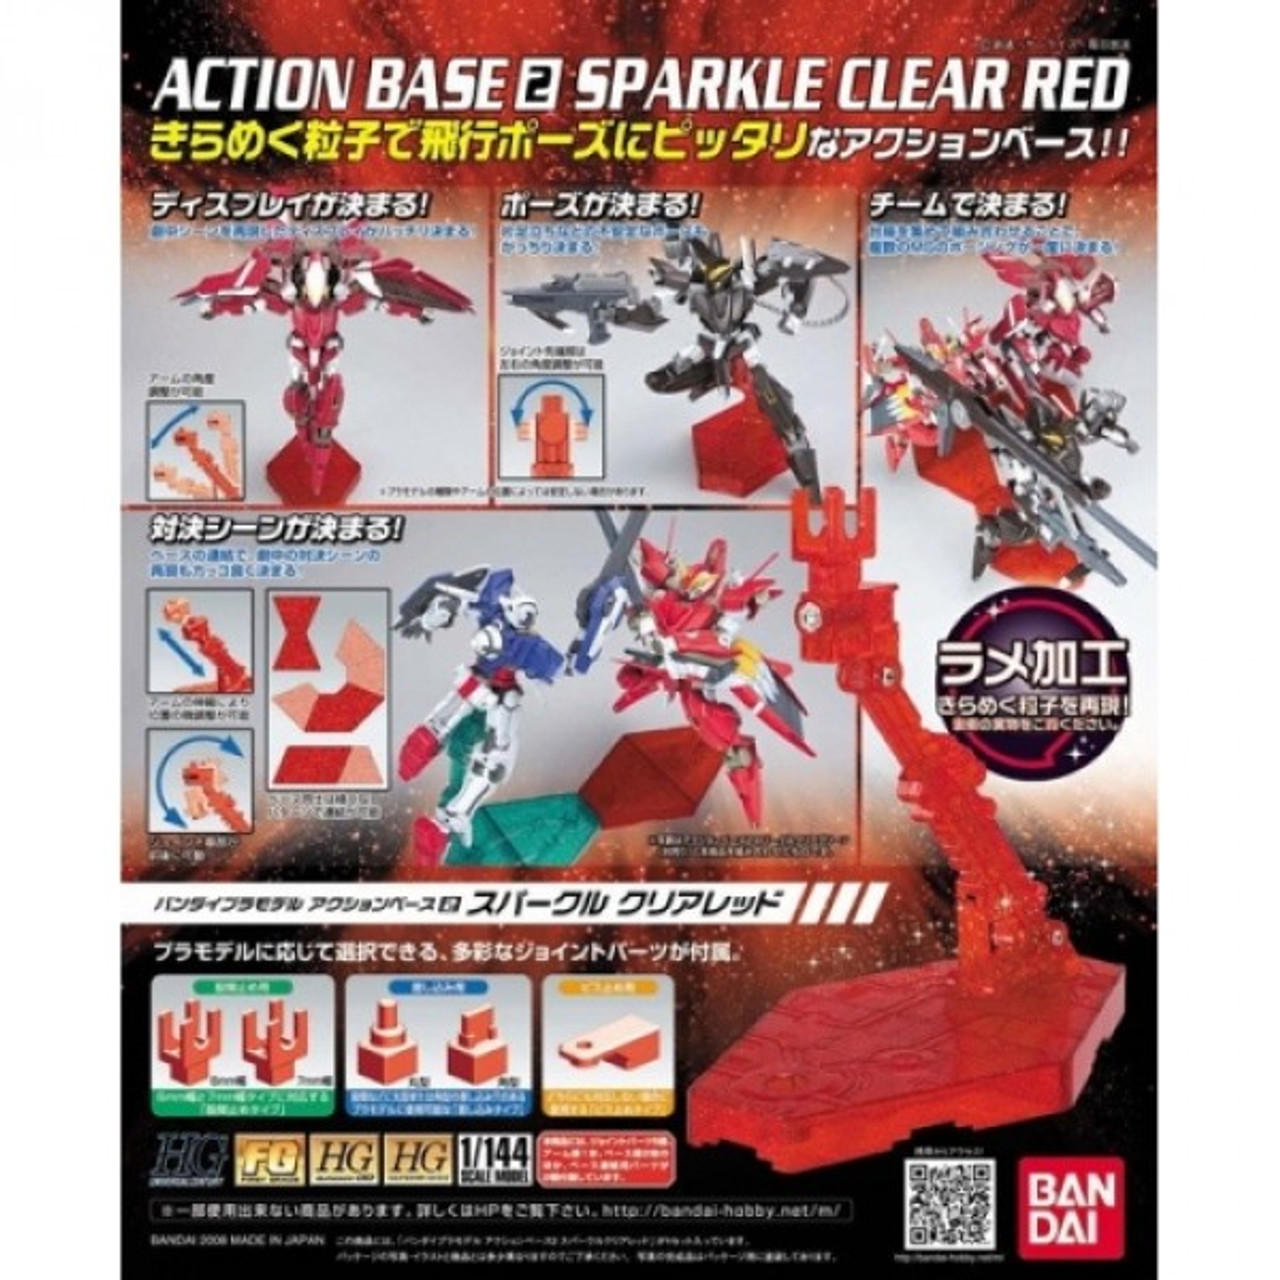 Action Base 2 - Sparkle Clear Red